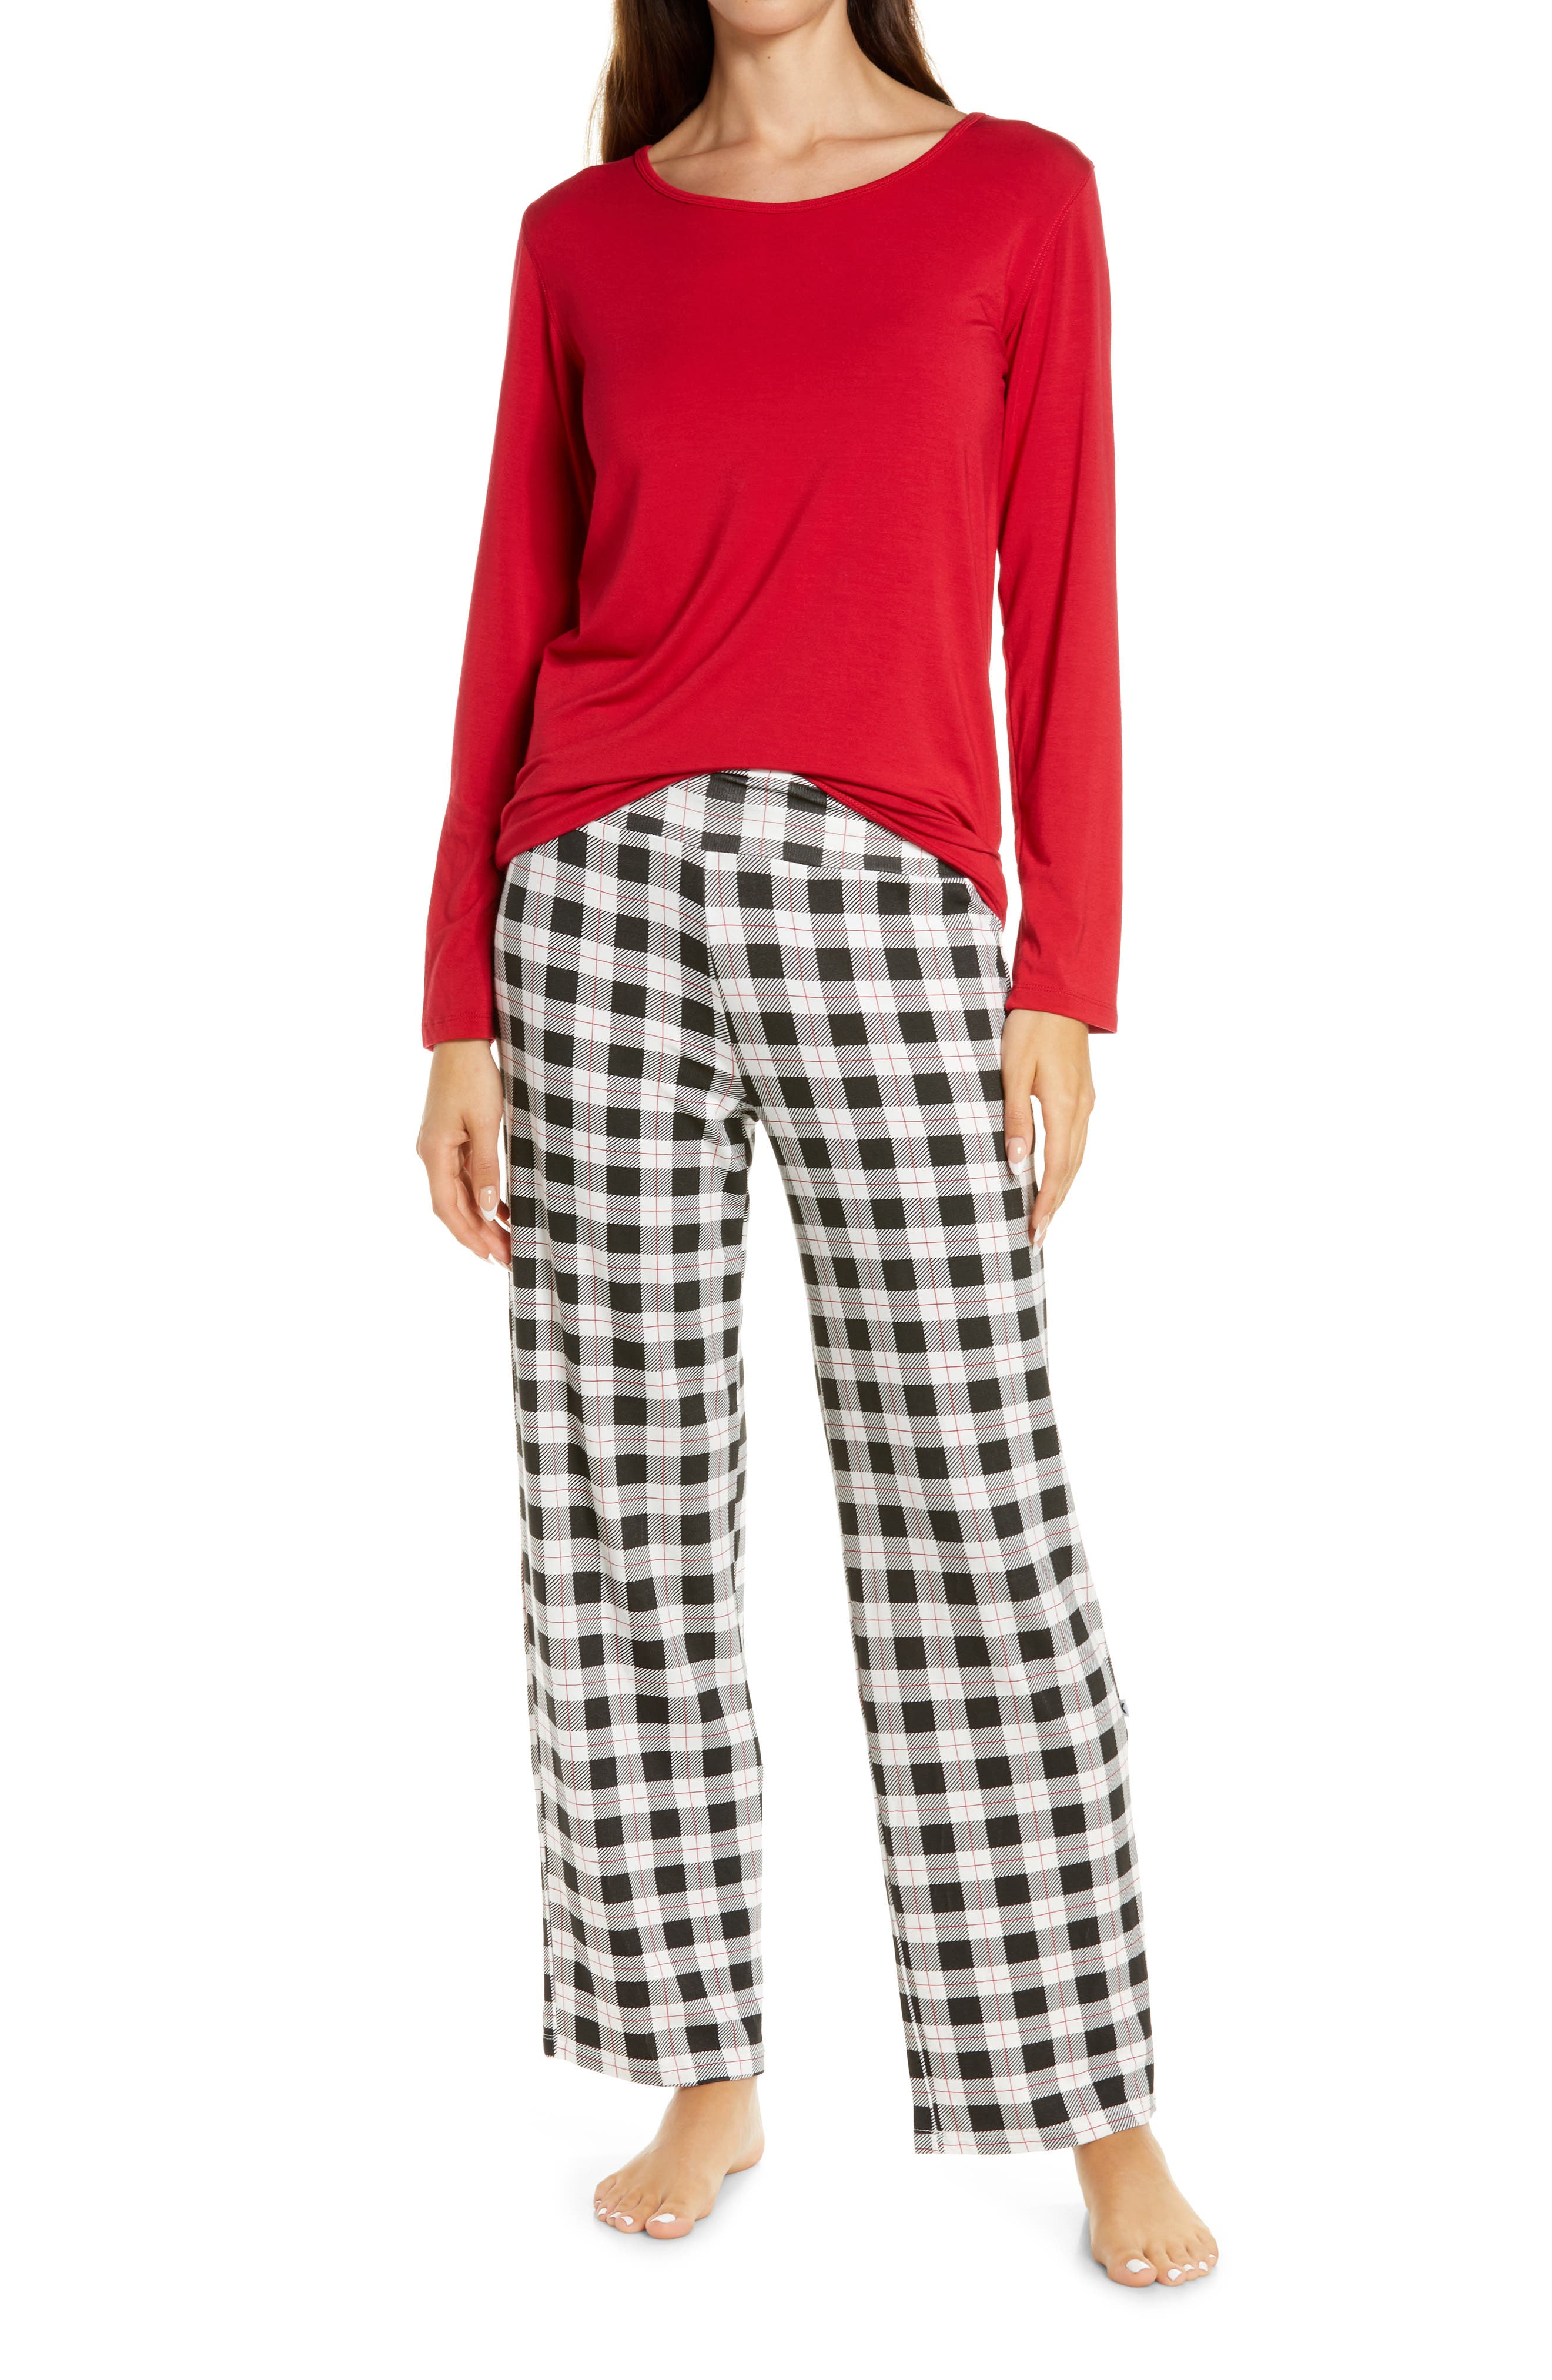 KicKee Pants Loosey Goosey Plaid Pajamas in Holiday 2021 Plaid at Nordstrom